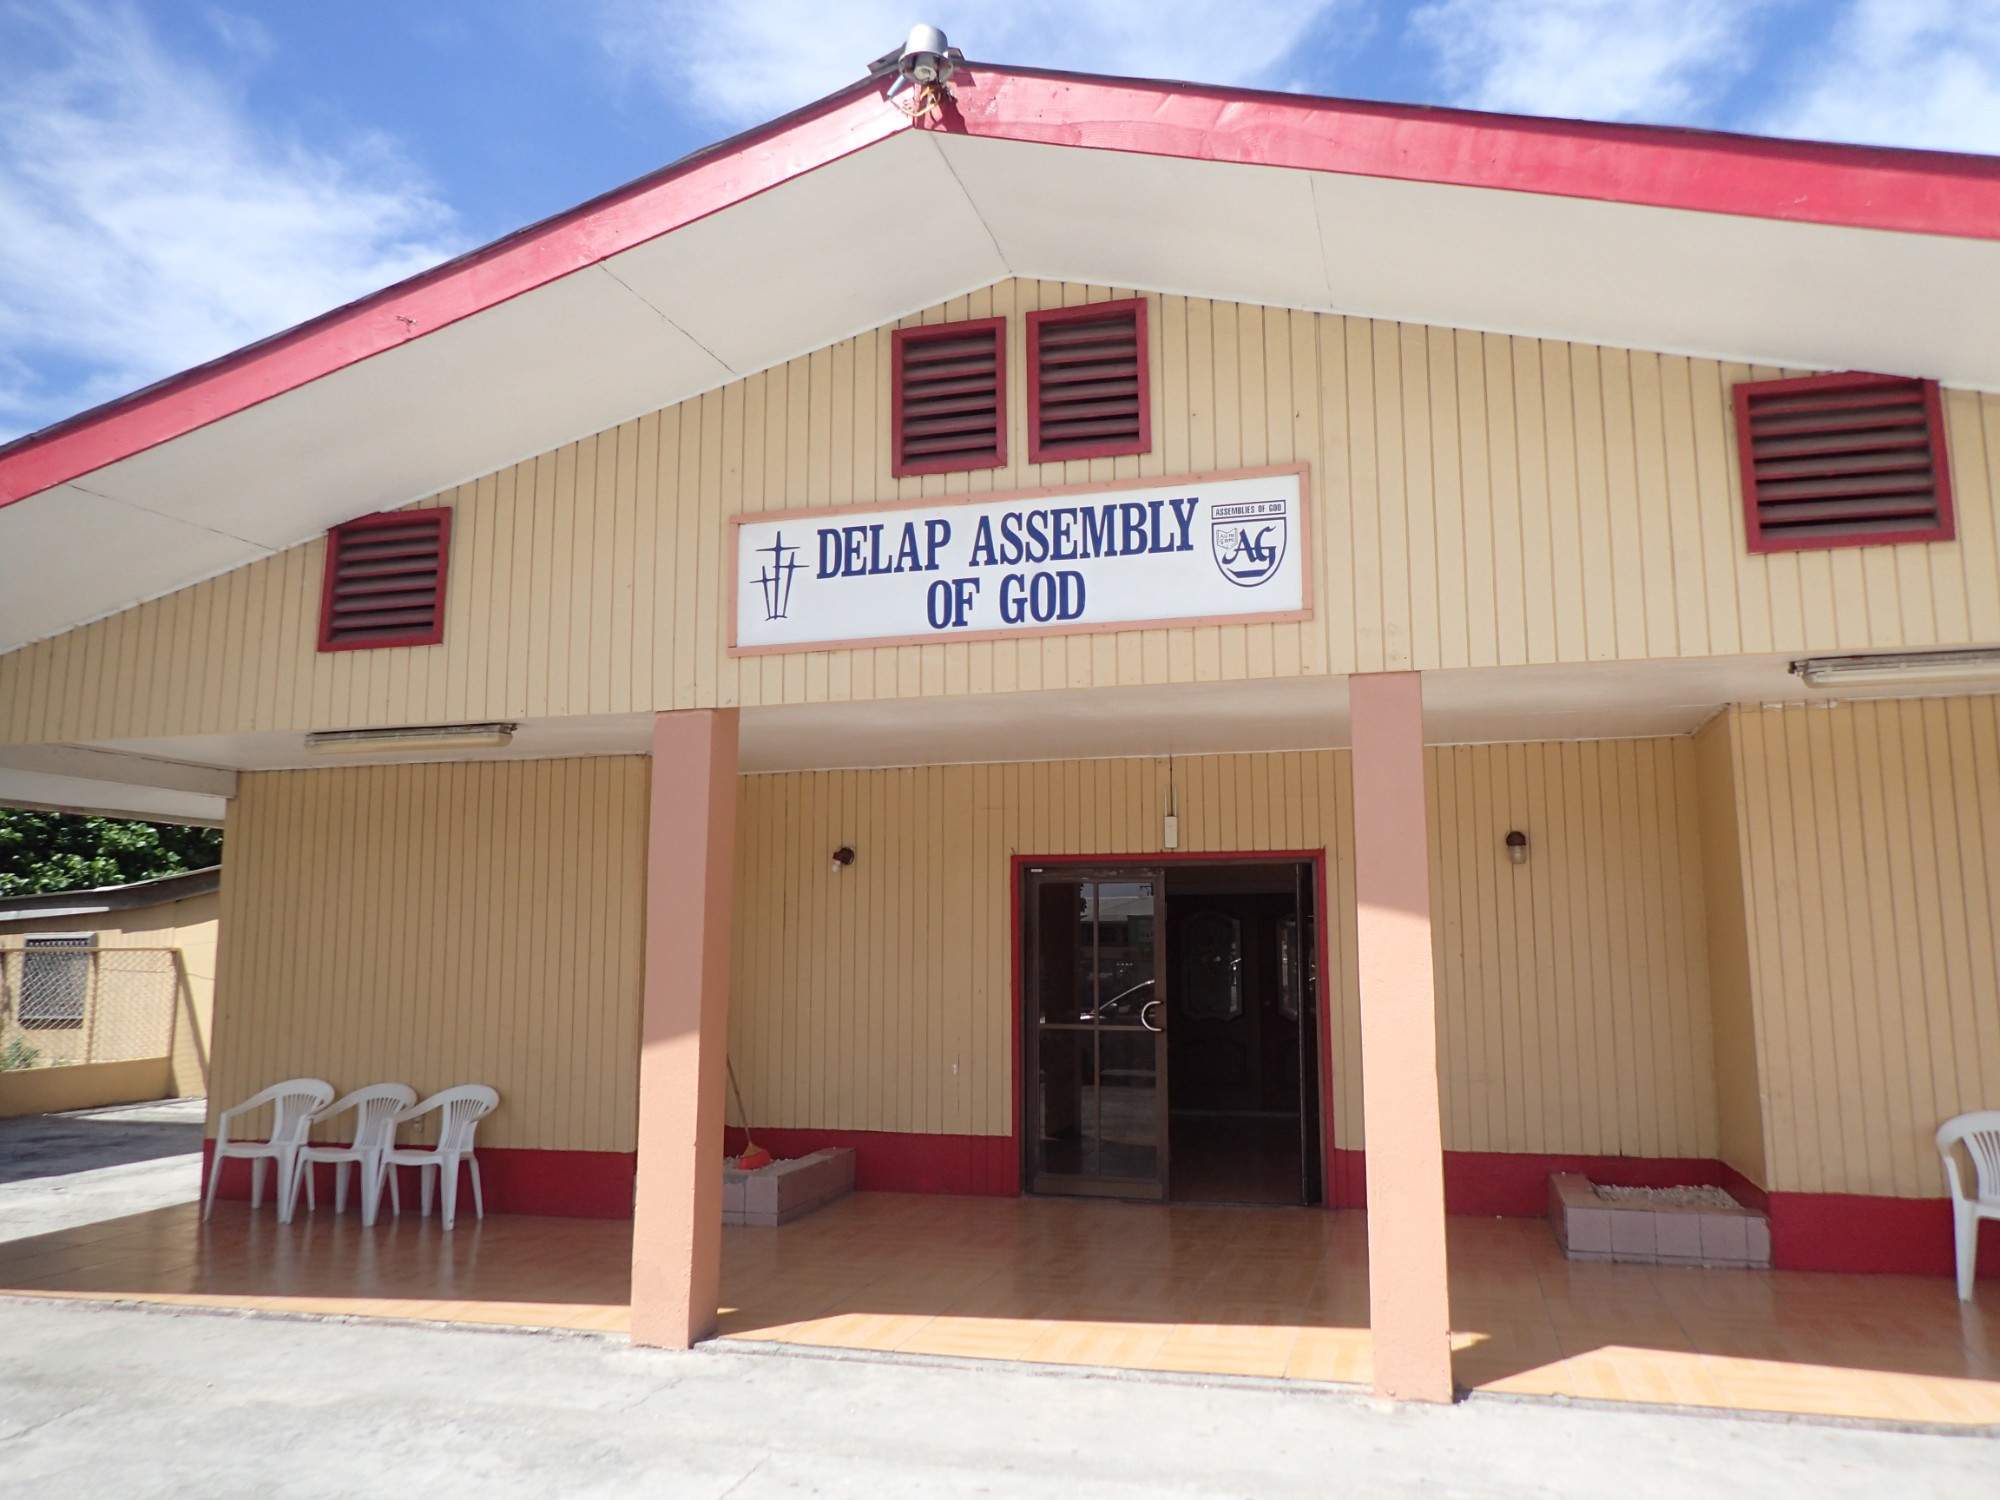 Delap Assembly of God, Marshall Islands